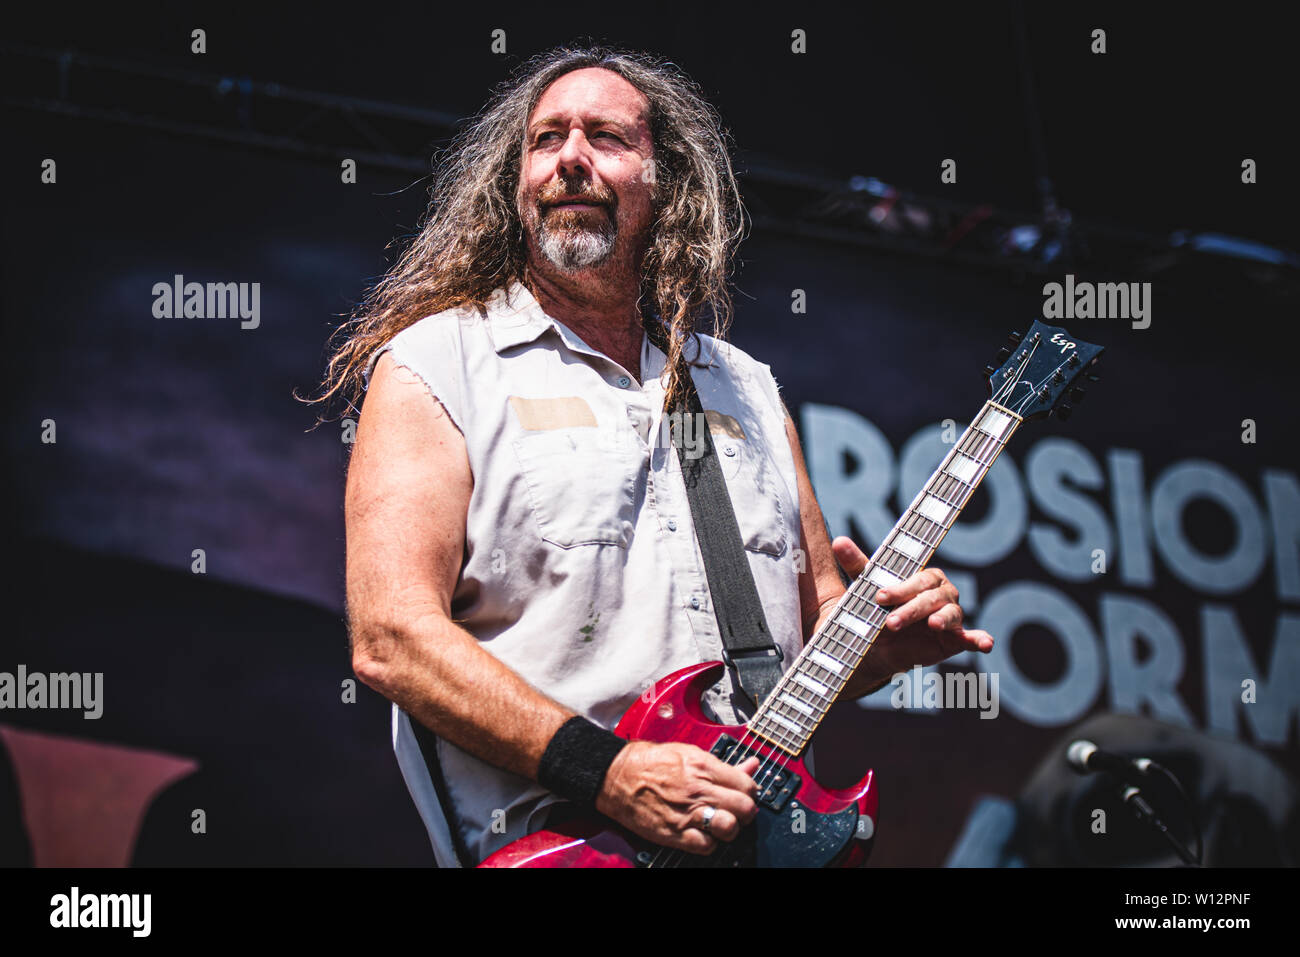 Woody Weatherman, guitarist and founder of the American heavy metal band Corrosion Of Conformity, performing live on stage in Bologna, at the Bologna Stock Photo